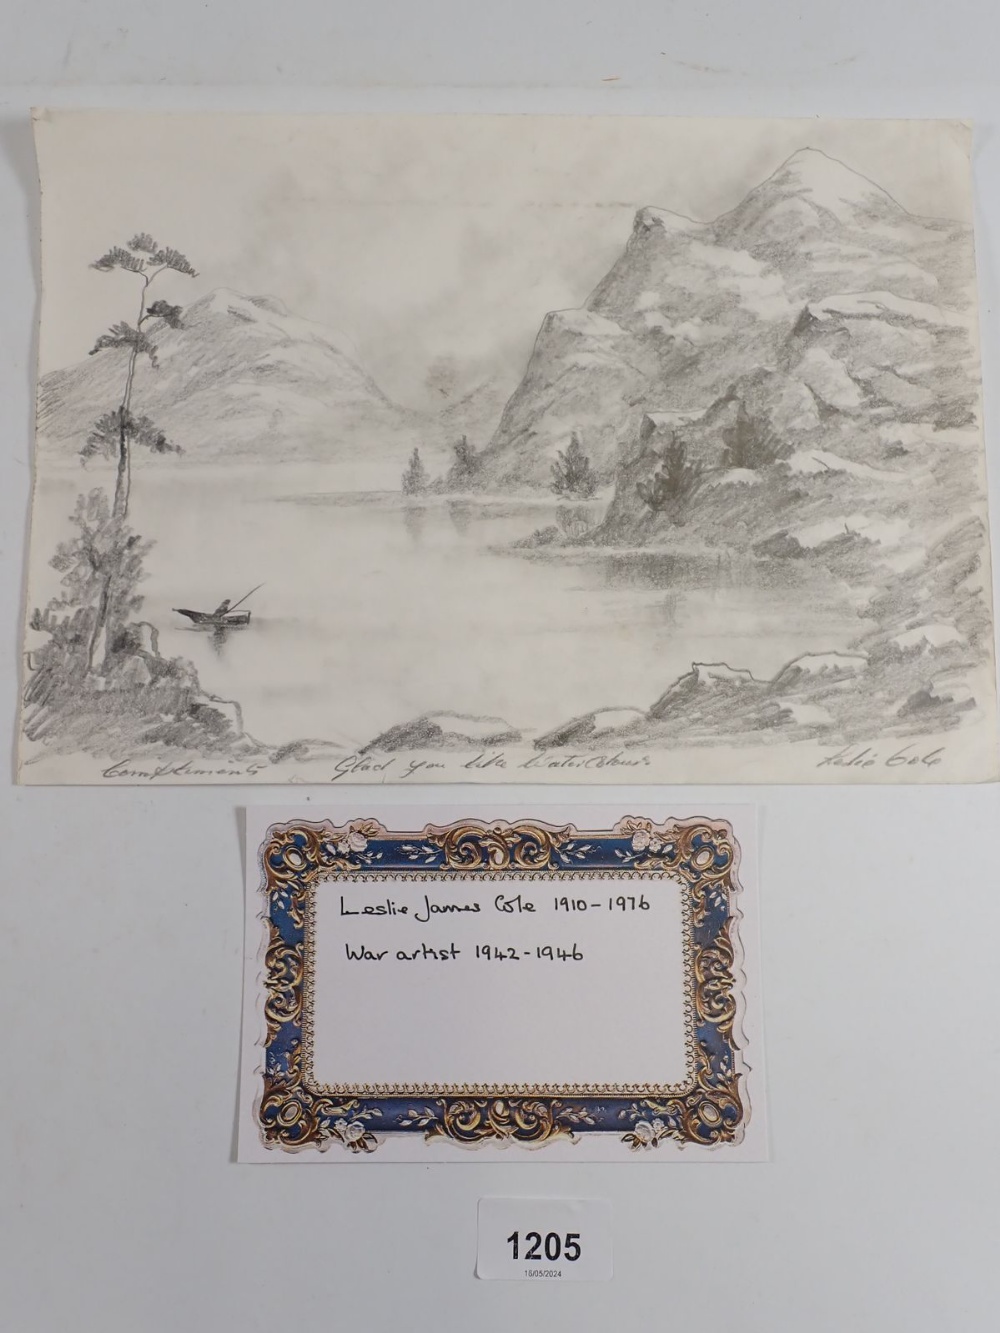 Leslie Cole - Pencil sketch of mountain and lake scene - inscribed "Compliments glad you like